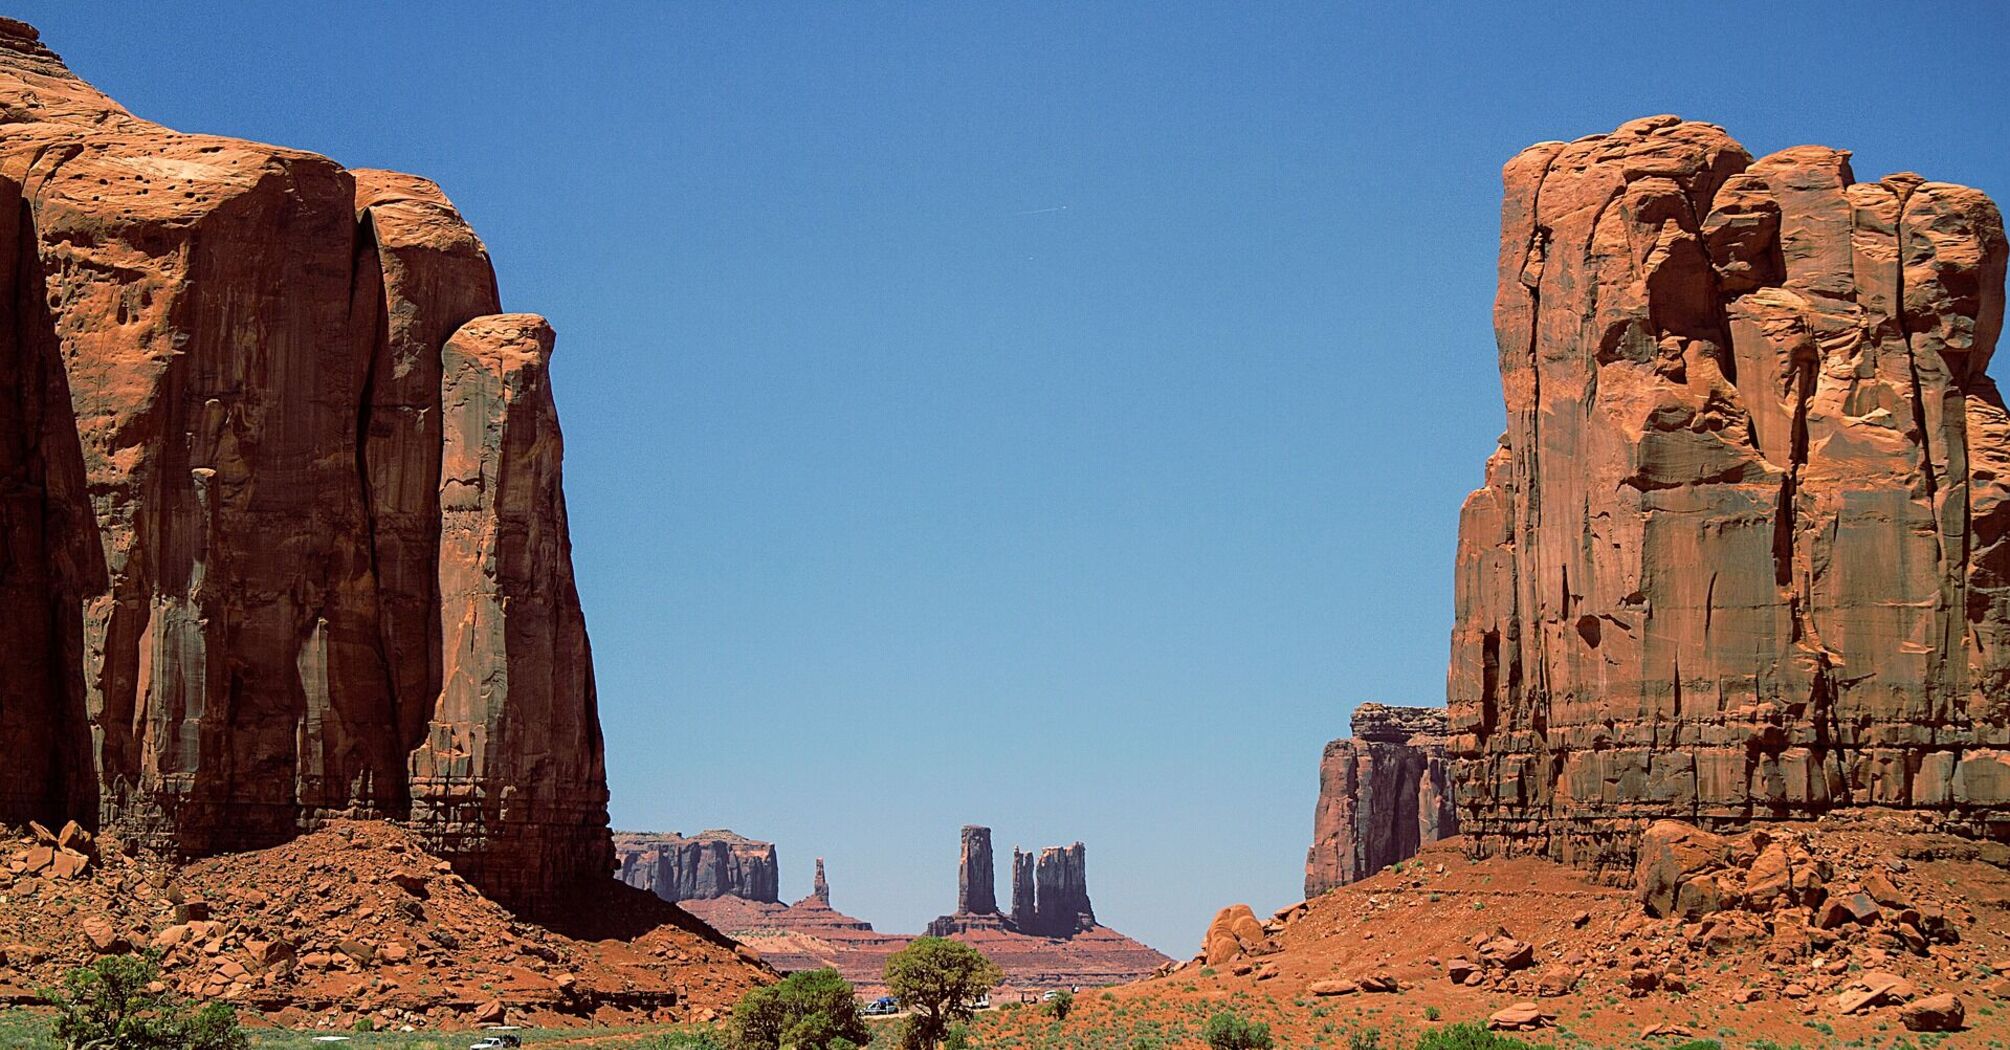 The American city of Moab was included in the list of the most friendly places in the world